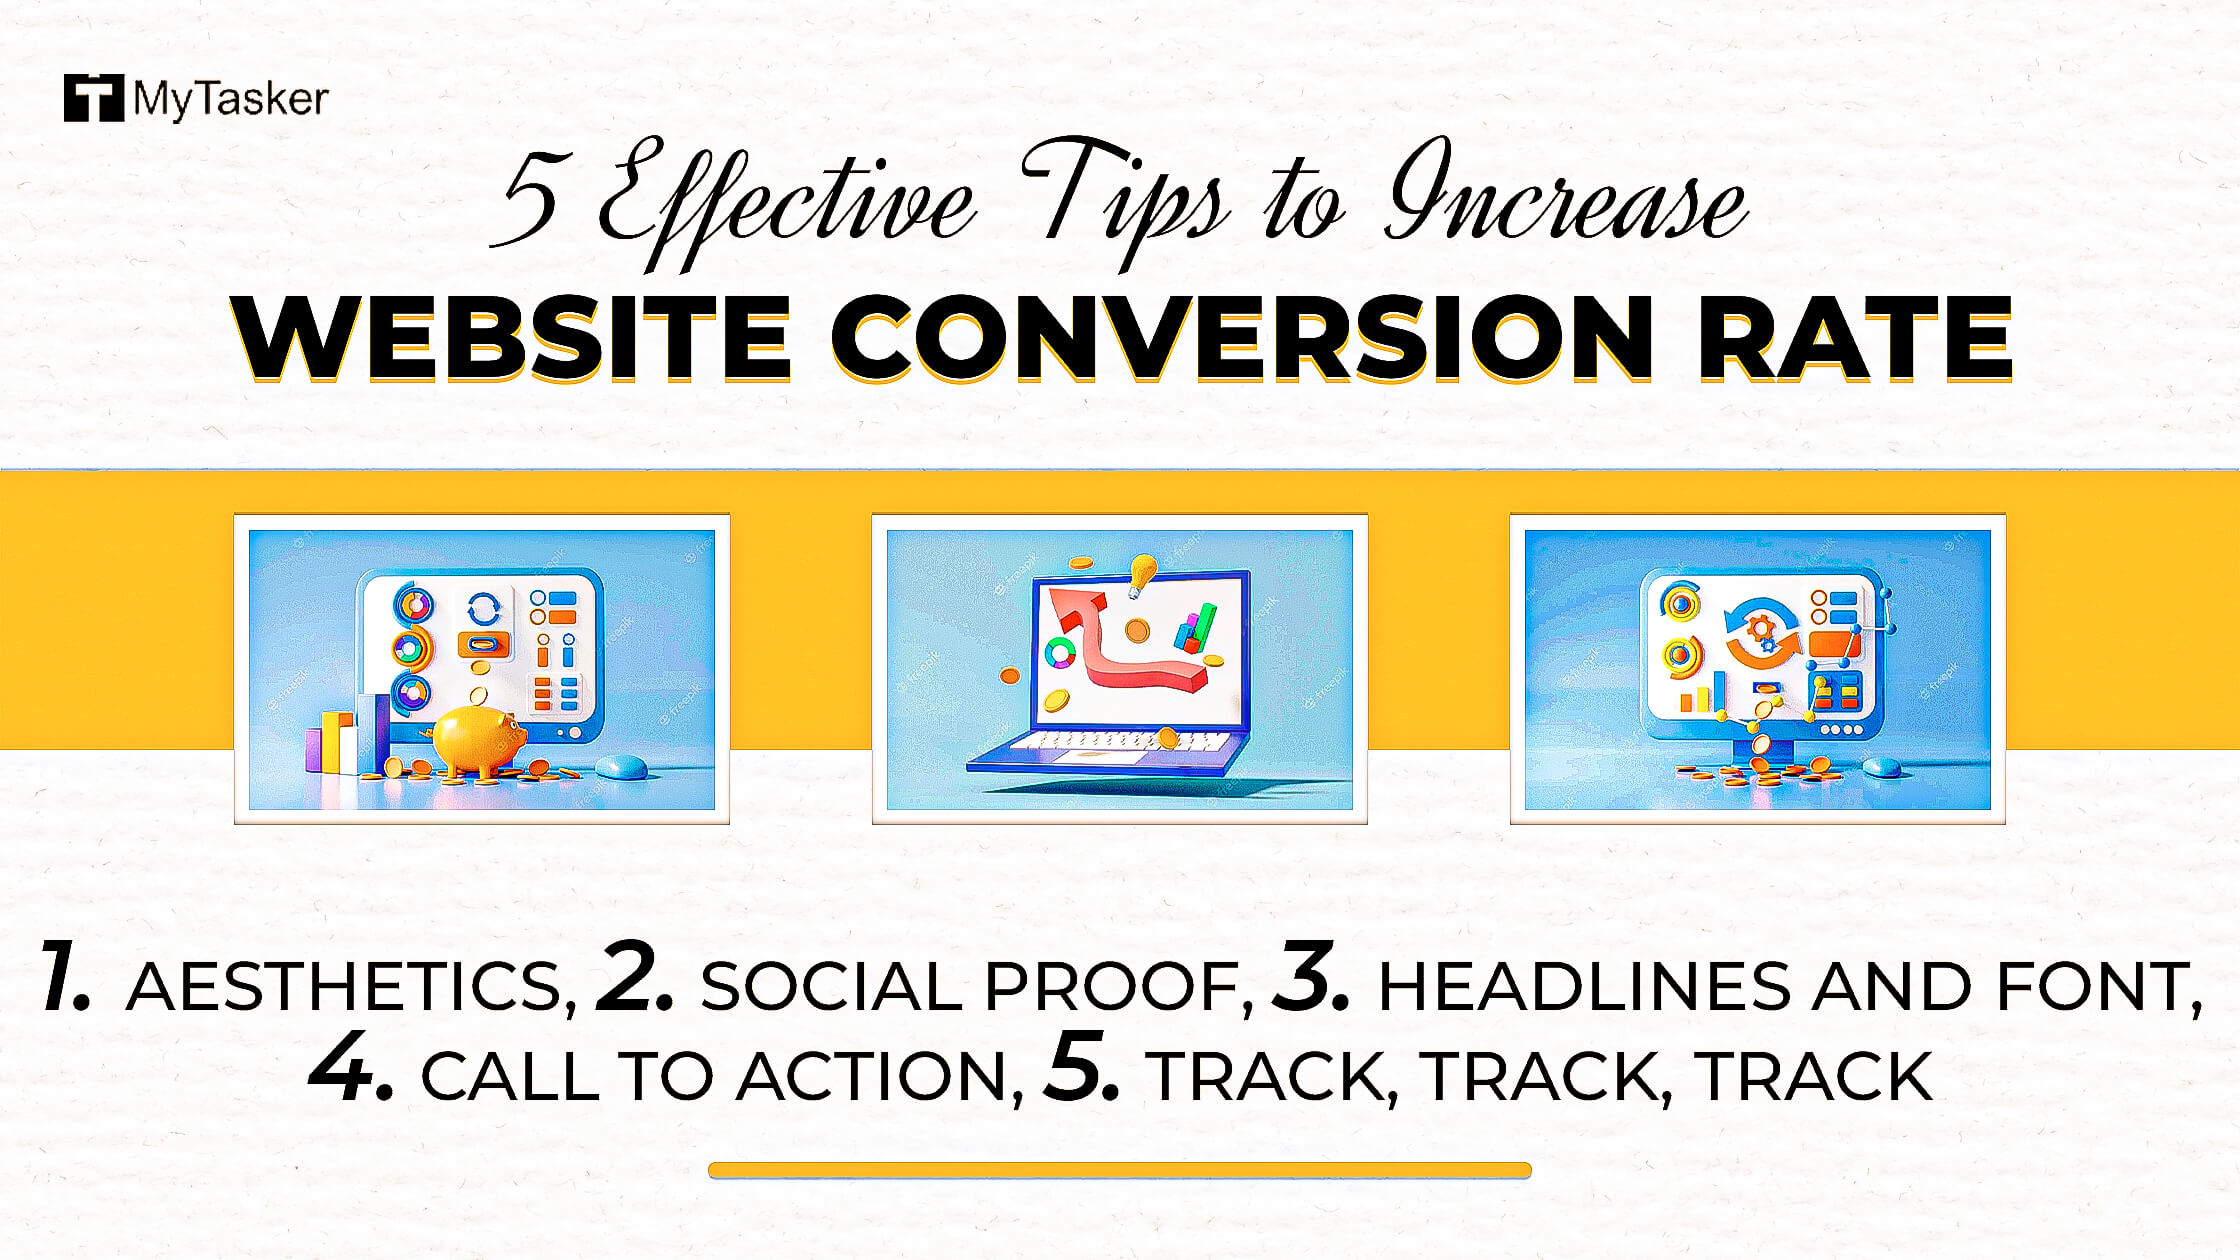 5 Effective Tips to Increase Website Conversion Rate